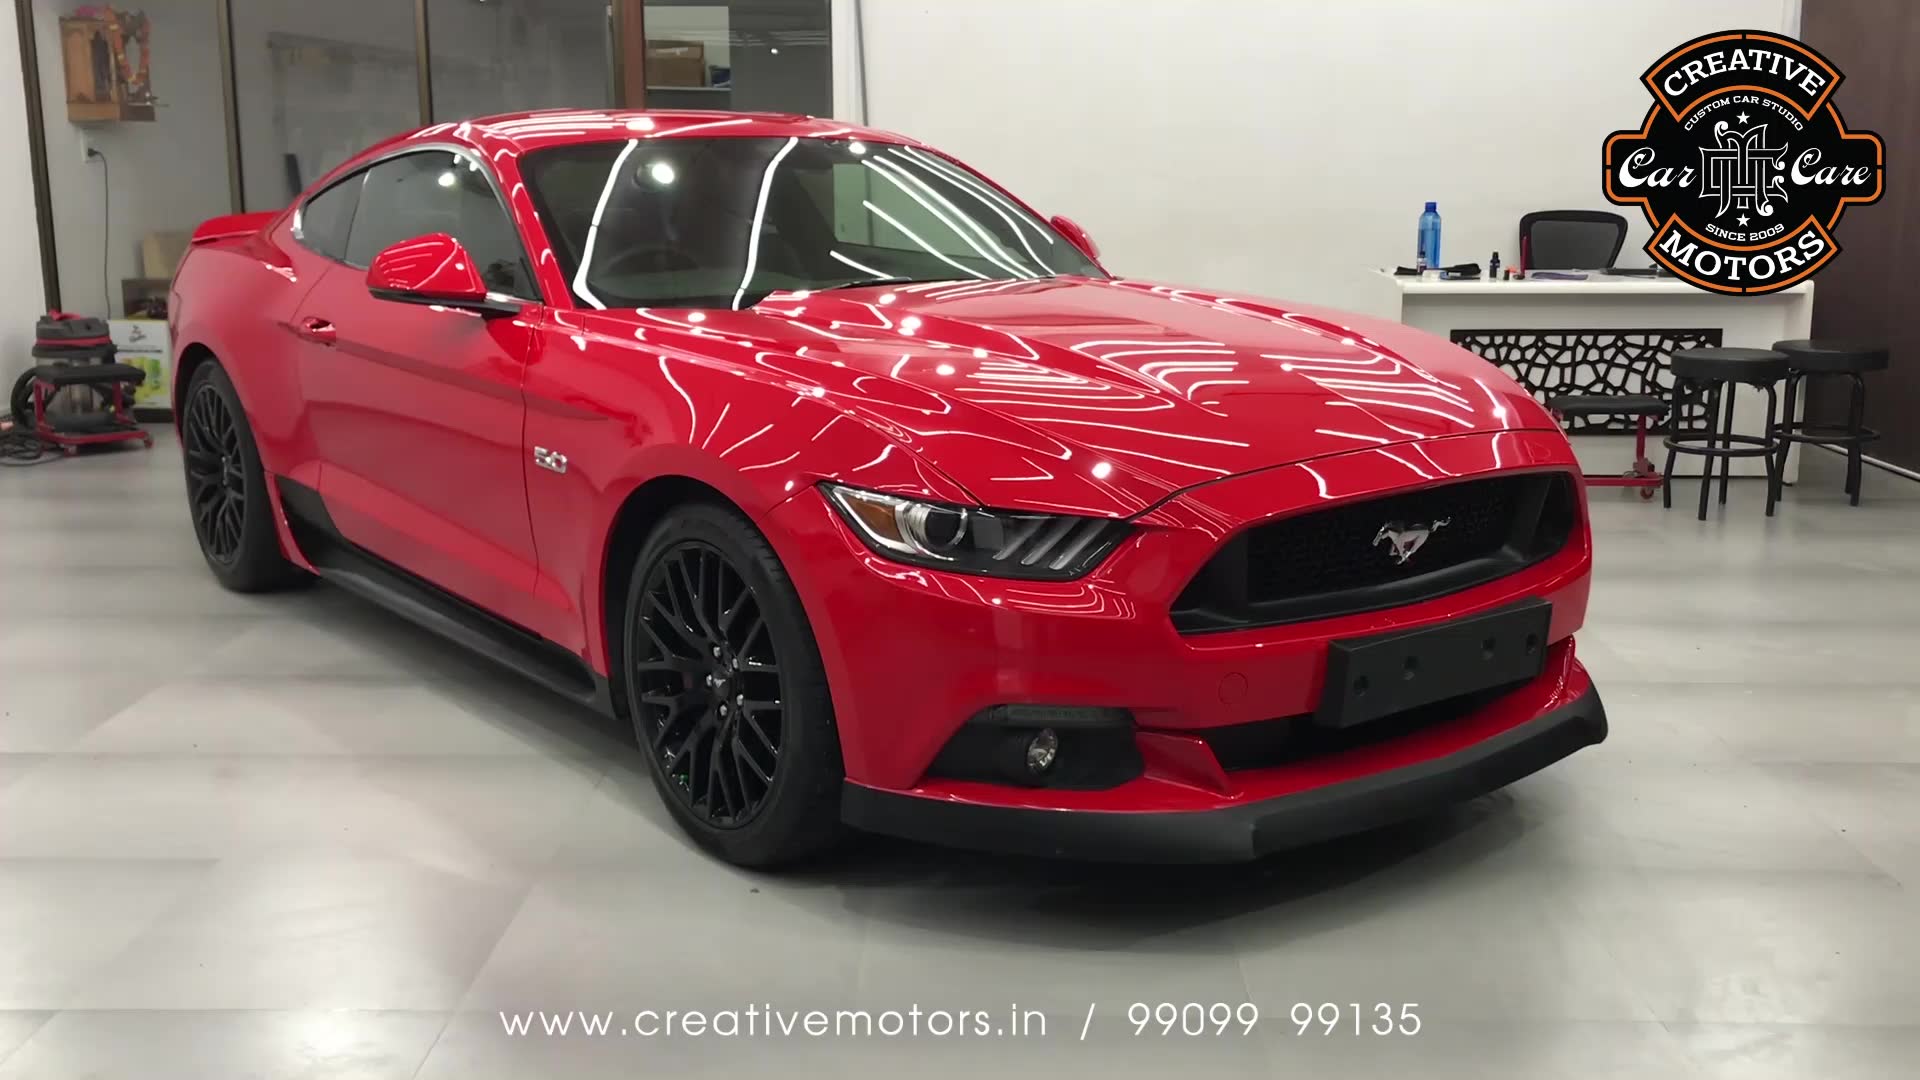 Benefits of Ceramic Coating👇  

✅9H Hardness - Scratch Resistant  
✅Removes Swirl marks   
✅Weather Resistance    
✅Gives Mirror Finish    
✅UV Protection
✅Anti Aging  
✅Water & Dust Repellent  
✅Easy to Clean & Maintain
✅Enhances the Paint 

Get the Best Ceramic Coating Treatment done For your Car Today itself to Avoid Future Scratches & Aging Effect. 

📞Call - +919909999135 ☎️
or   📲 - +919909999134 

♐️Visit-www.creativemotors.in

Creative Motors ®️
📍 Location-1: Urvashi Complex, Mithakhali Six Roads, Ahmedabad
📍 Location-2: New York Tower, Thaltej, SG Highway Ahmedabad.
📍 Location-3: L-32, GHB, Akshar Marg, Rajkot.

❌ Beware of Cheap Coatings available in the market which merely protect the Paint.
.
.
.
#ahmedabad_instagram #ahmedabad_diaries #ahmedabadcity #ahmedabadinstagram #ahmedabadone #rajkot_instagram #rajkotdiaries #rajkotcity #rajkotphotography #rajkotinstagram #rajkotcars #ceramiccoating #ceramiccoatingprotection #ceramiccoating9h #autodetail #autodetailing #autodetailers #autodetailingworld #autodetailersofinstagram #autodetailng #autodetailproducts